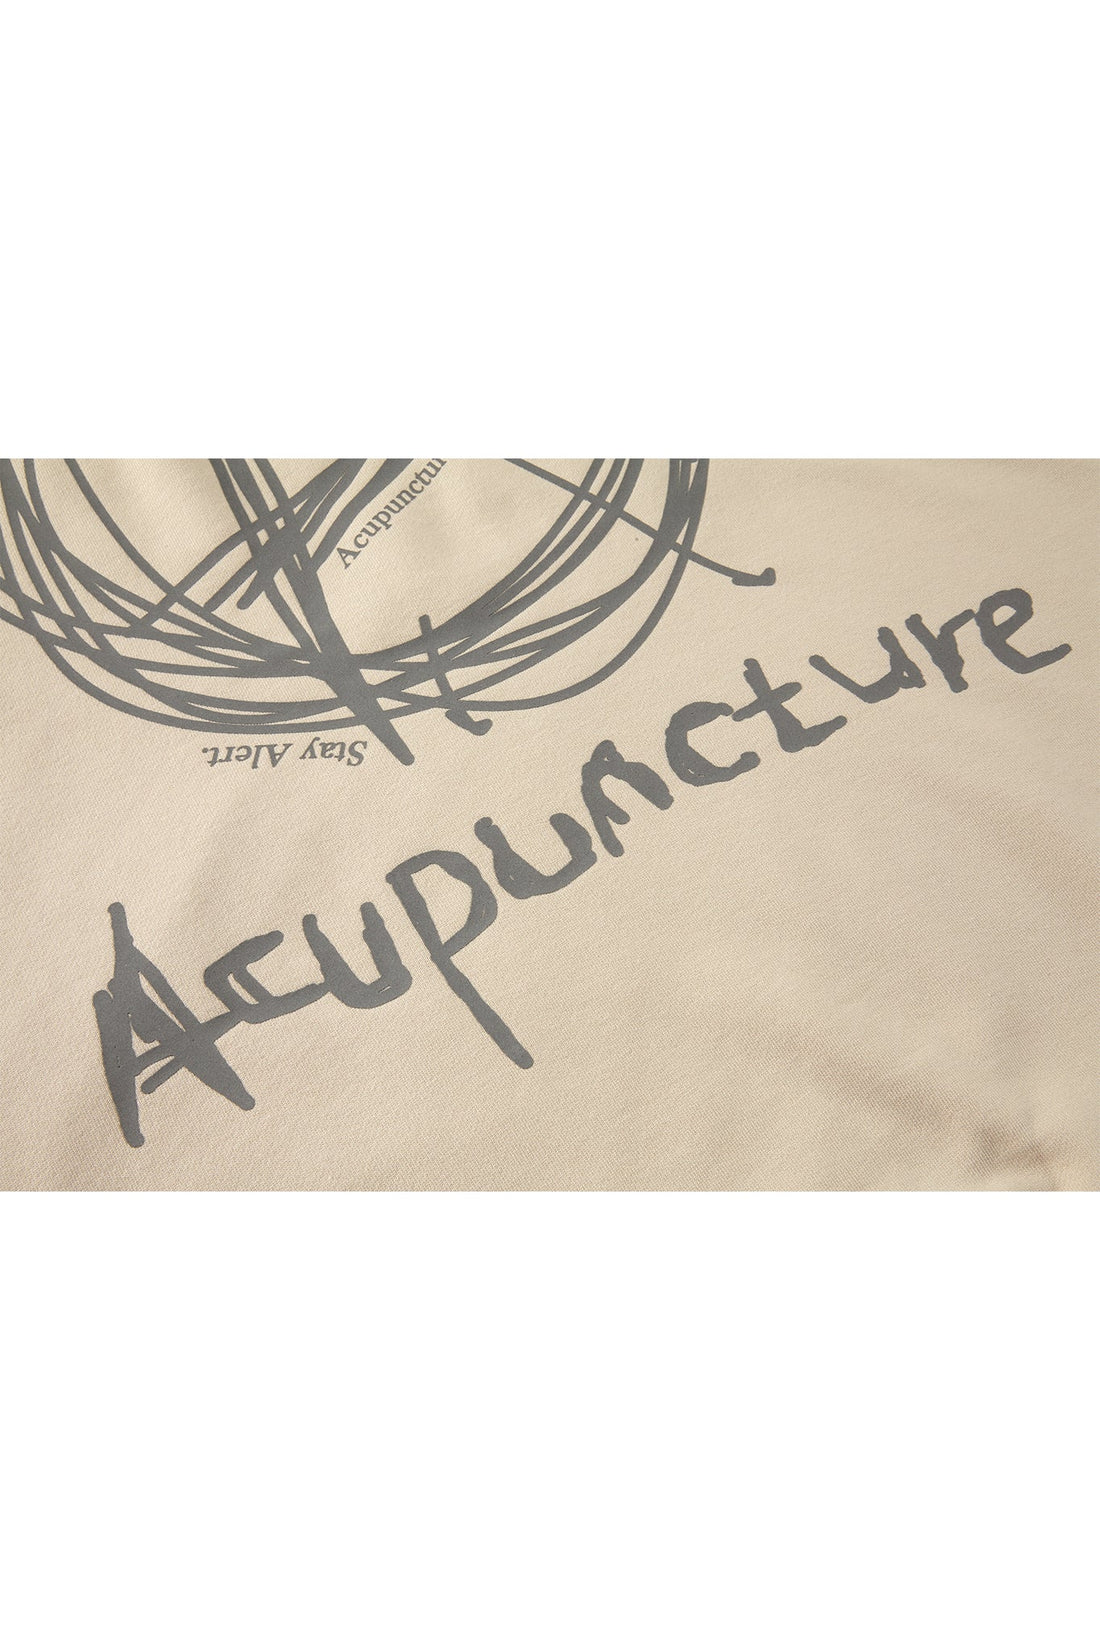 A HOODIE KHAKI Acupuncture